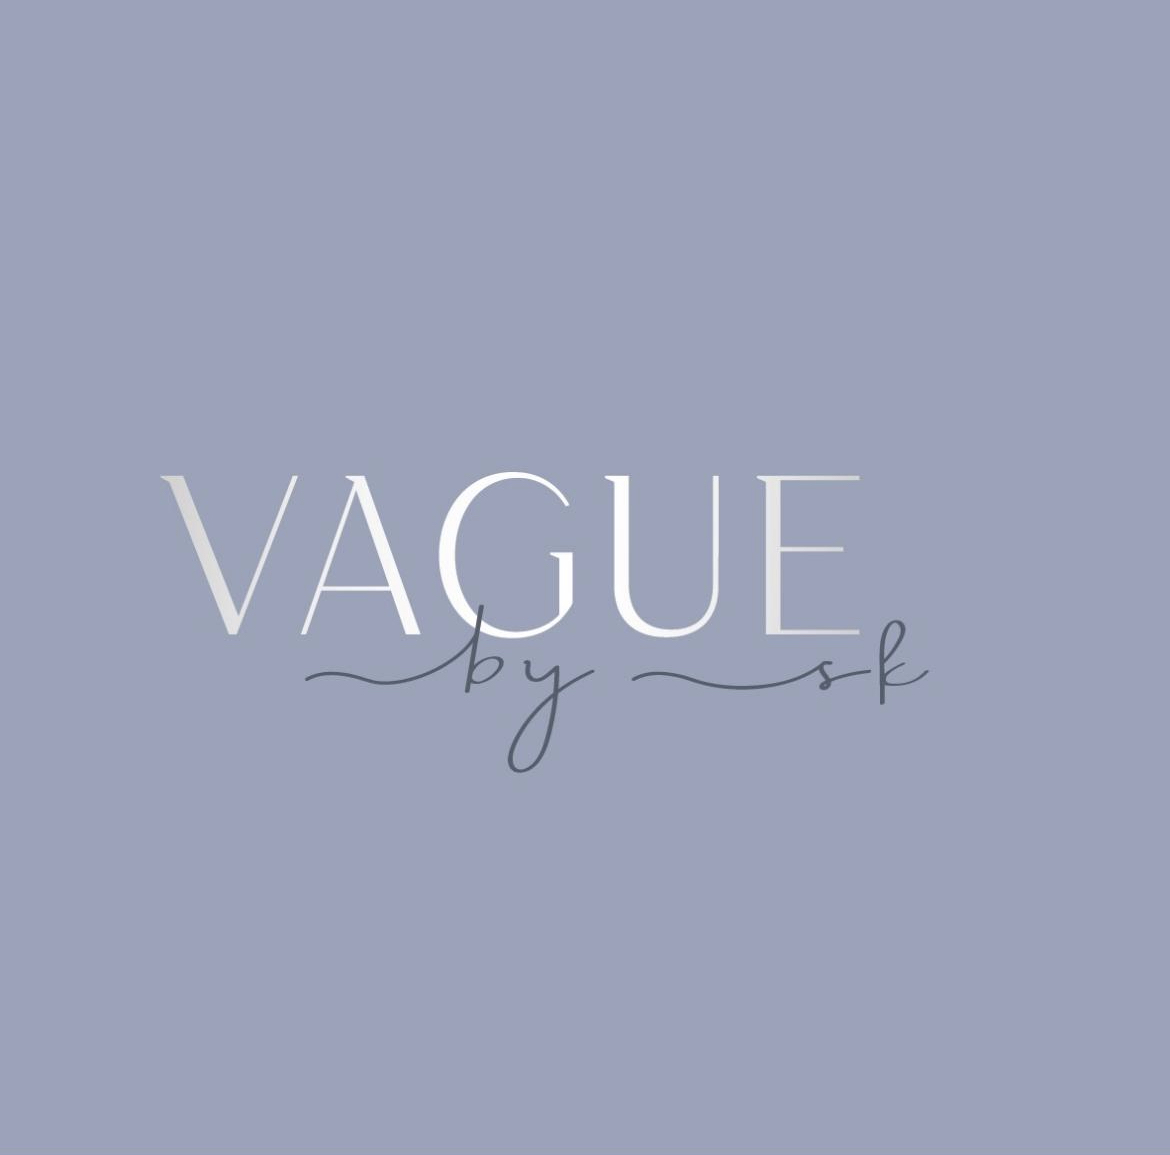 Vague by sk